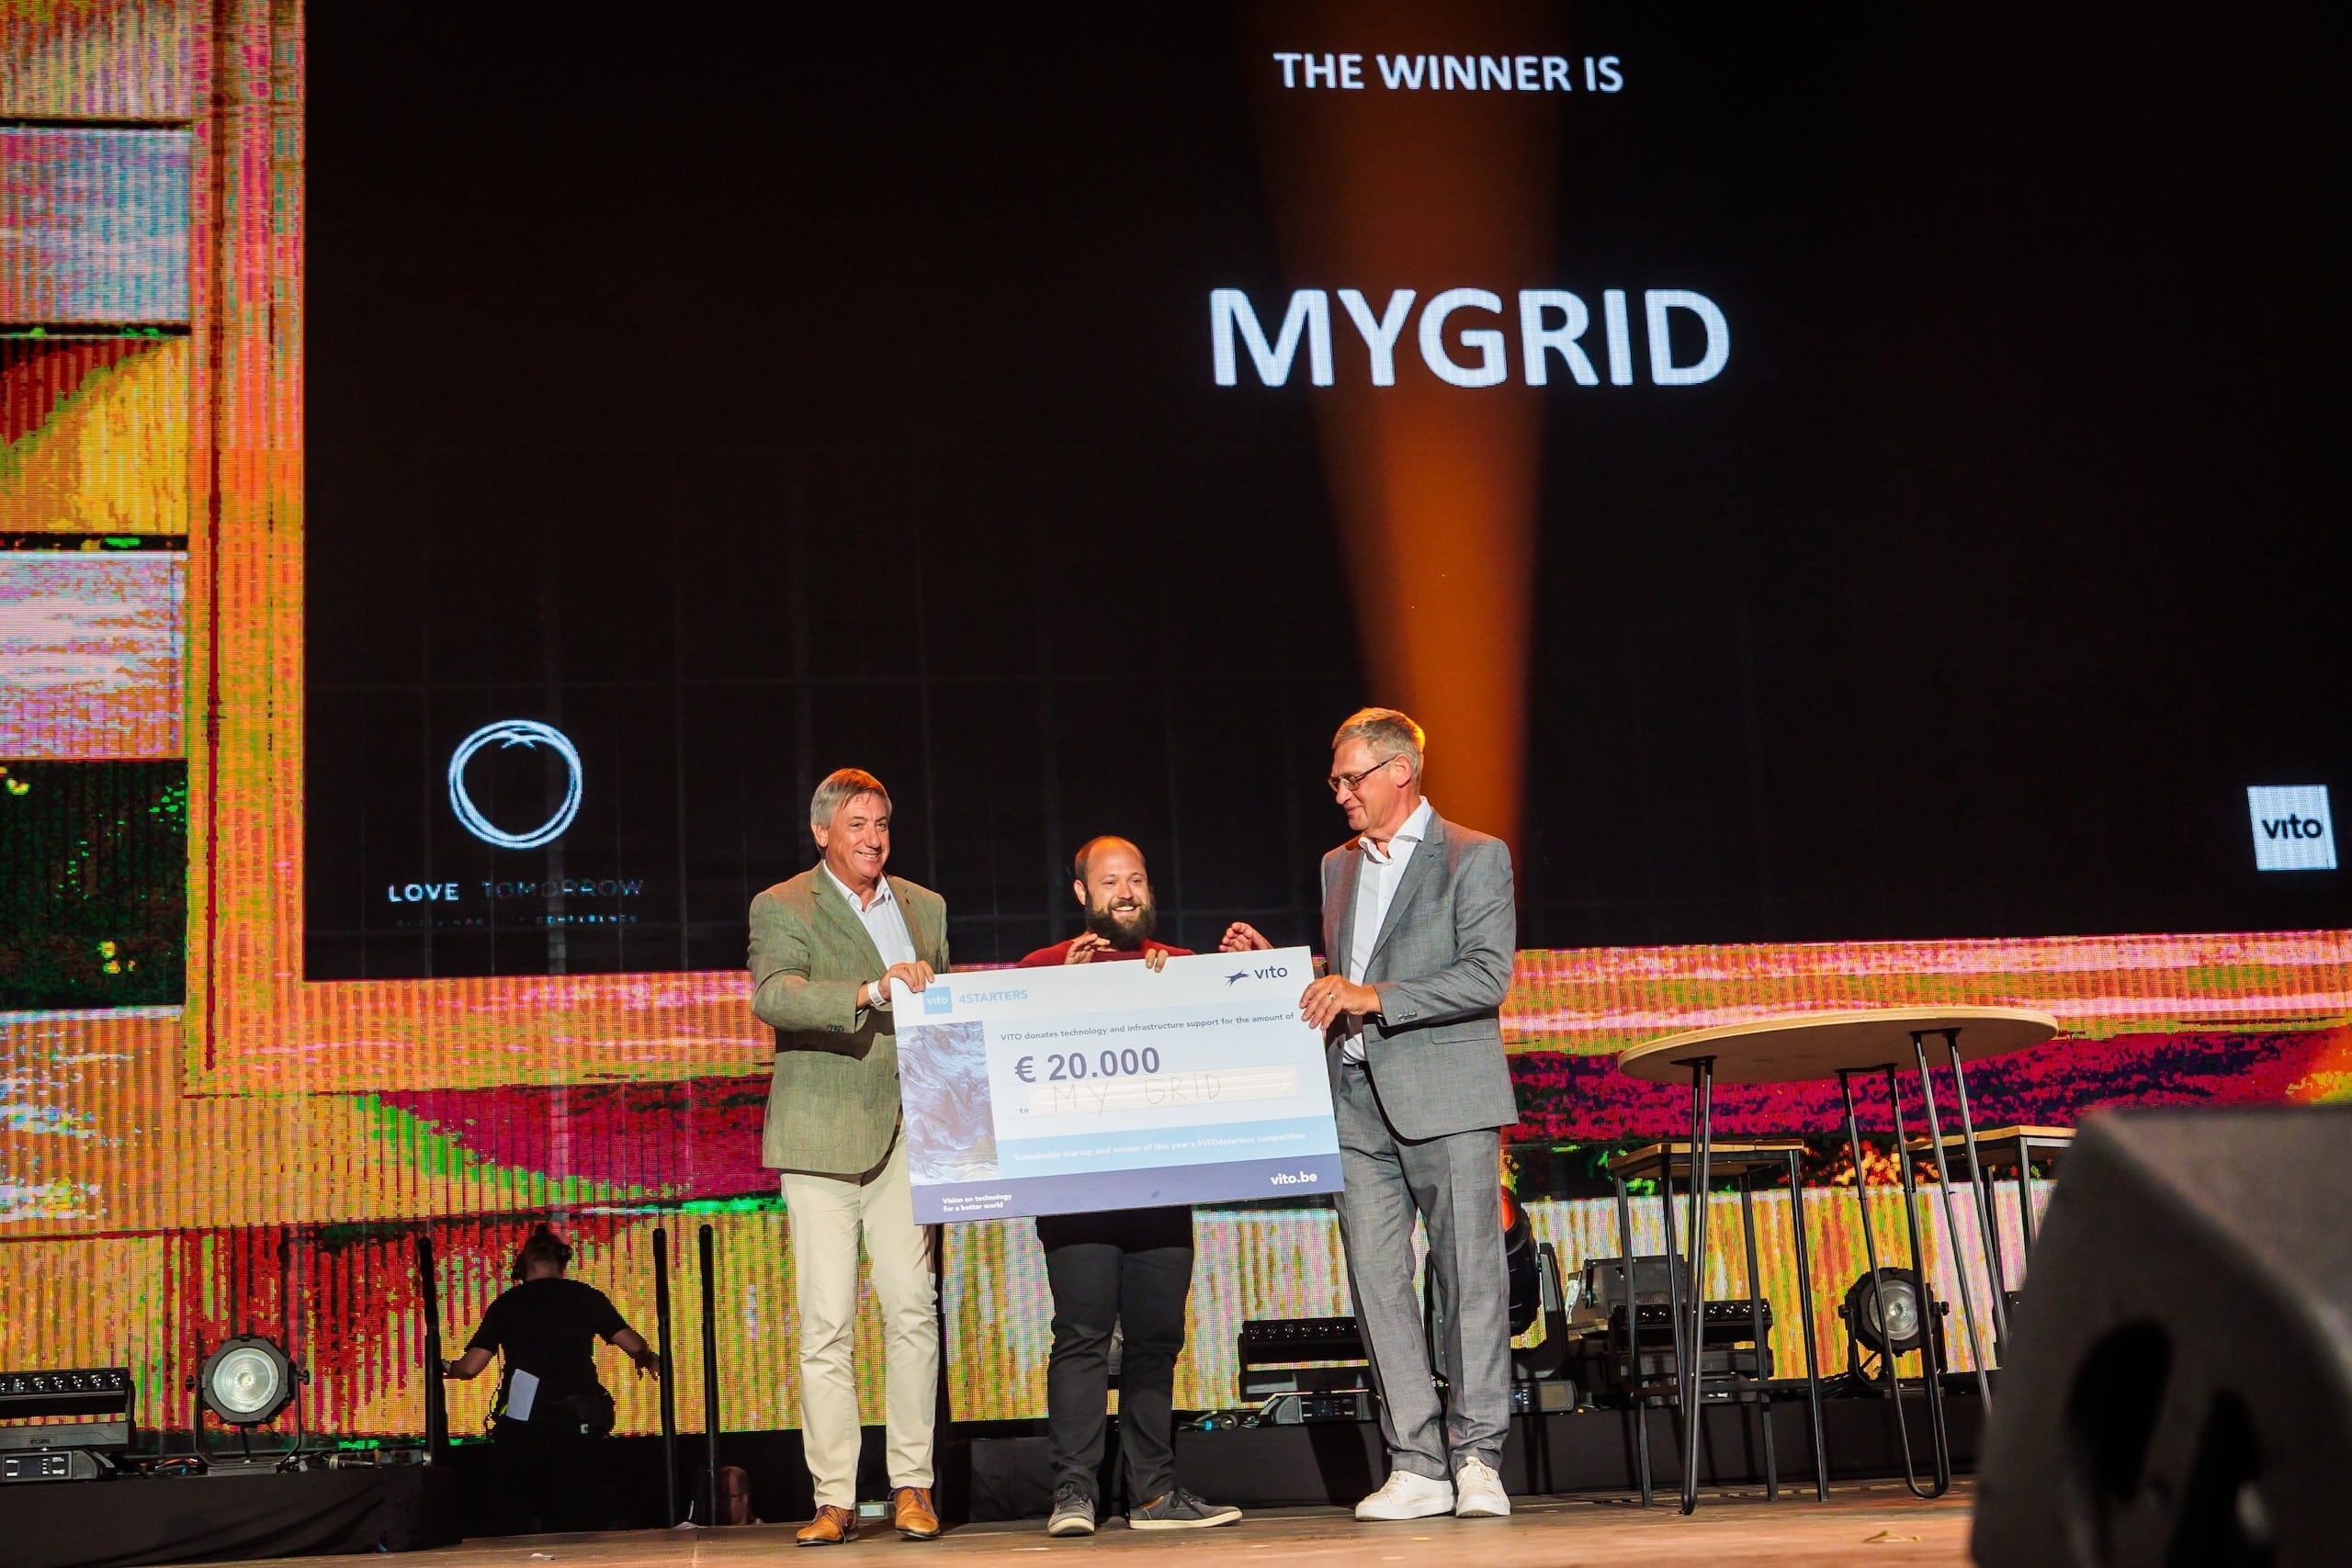 MyGrid with Dirk Fransaer and Jan Jambon